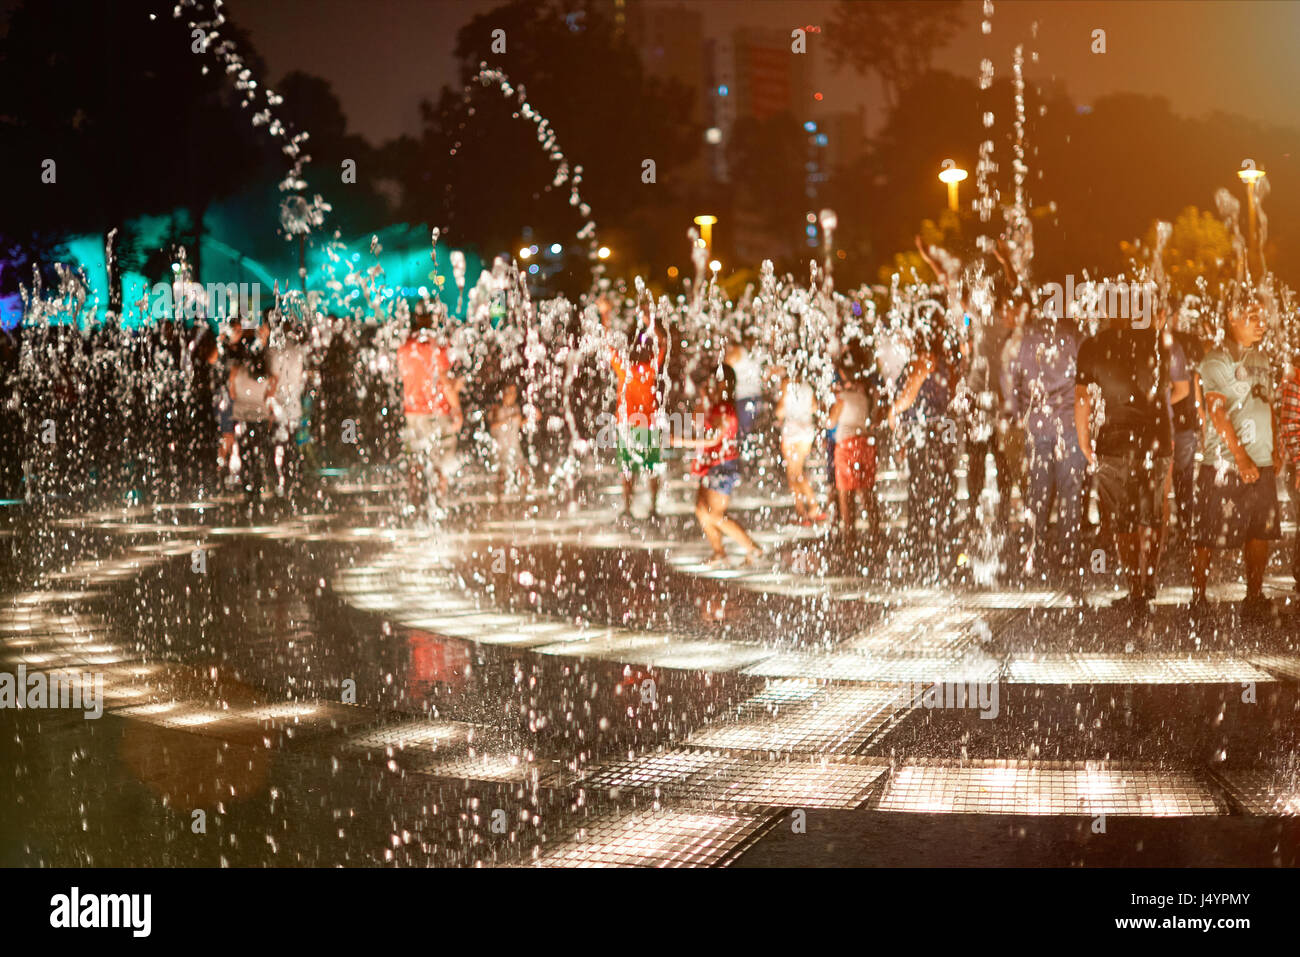 Water fountain splashes at night on blur playing people background Stock Photo